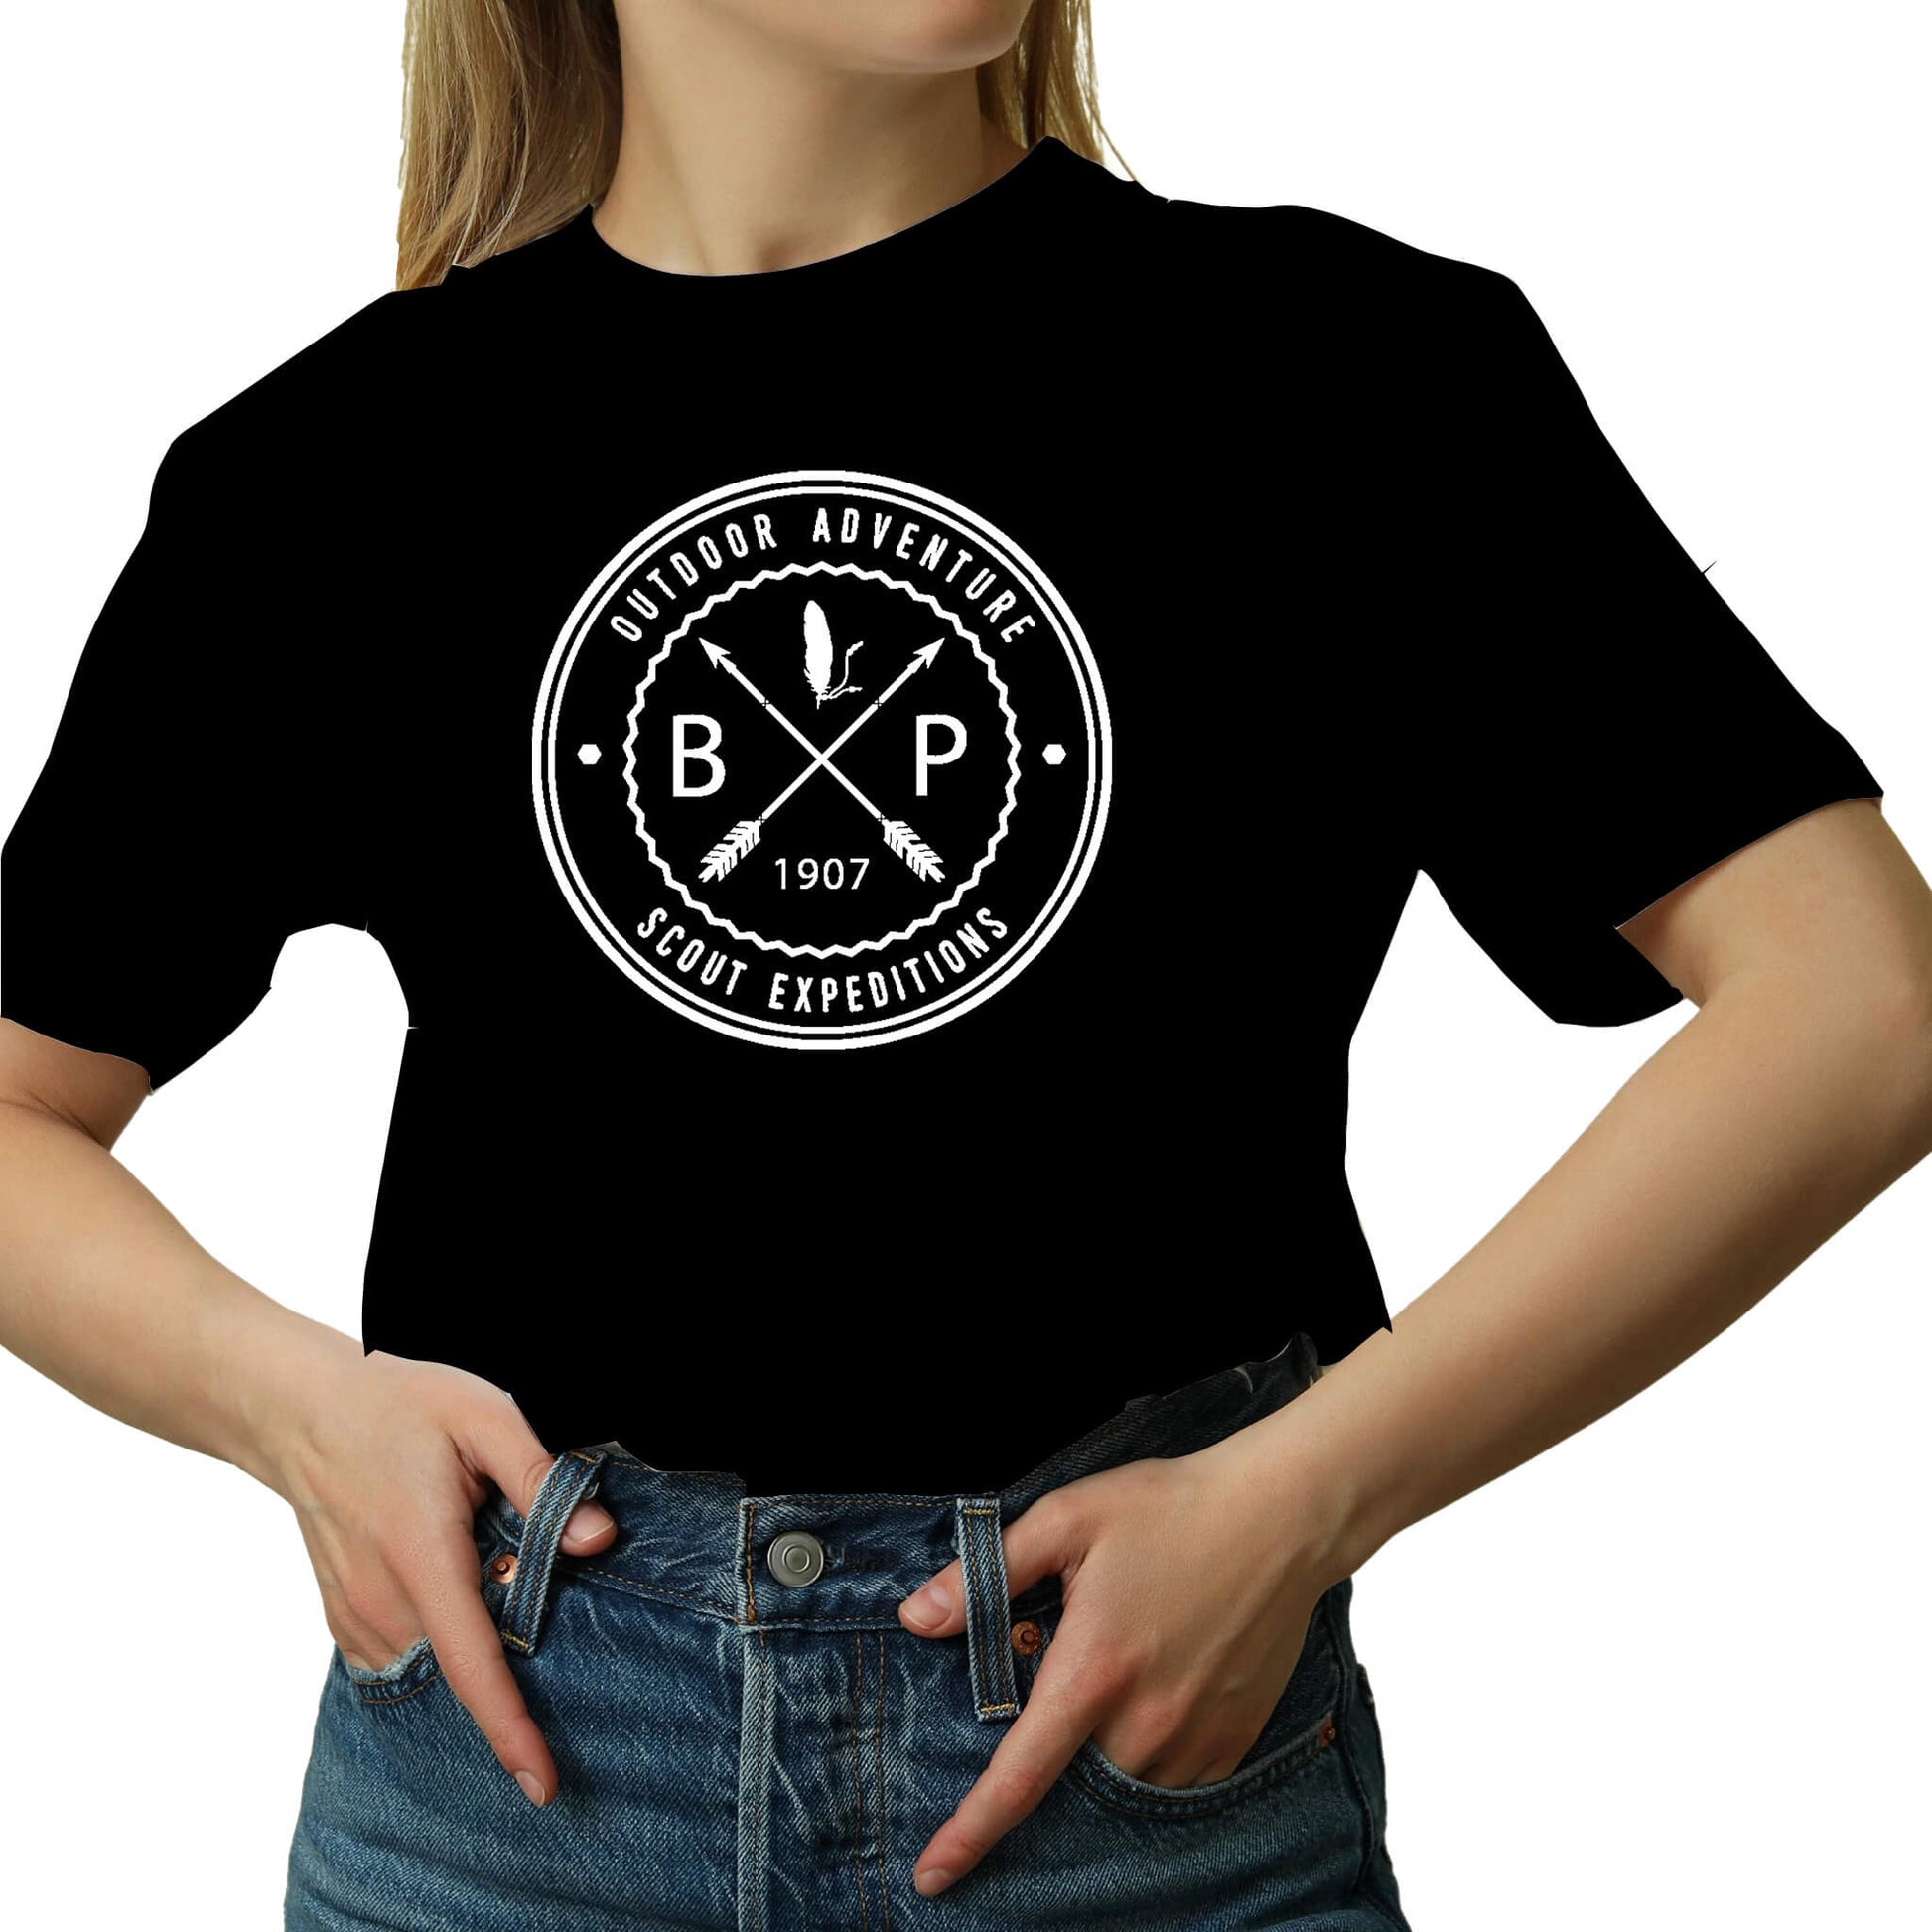 a black t shirt with the text out door adveture scout expeditions BP 1907 with crossed arrows.